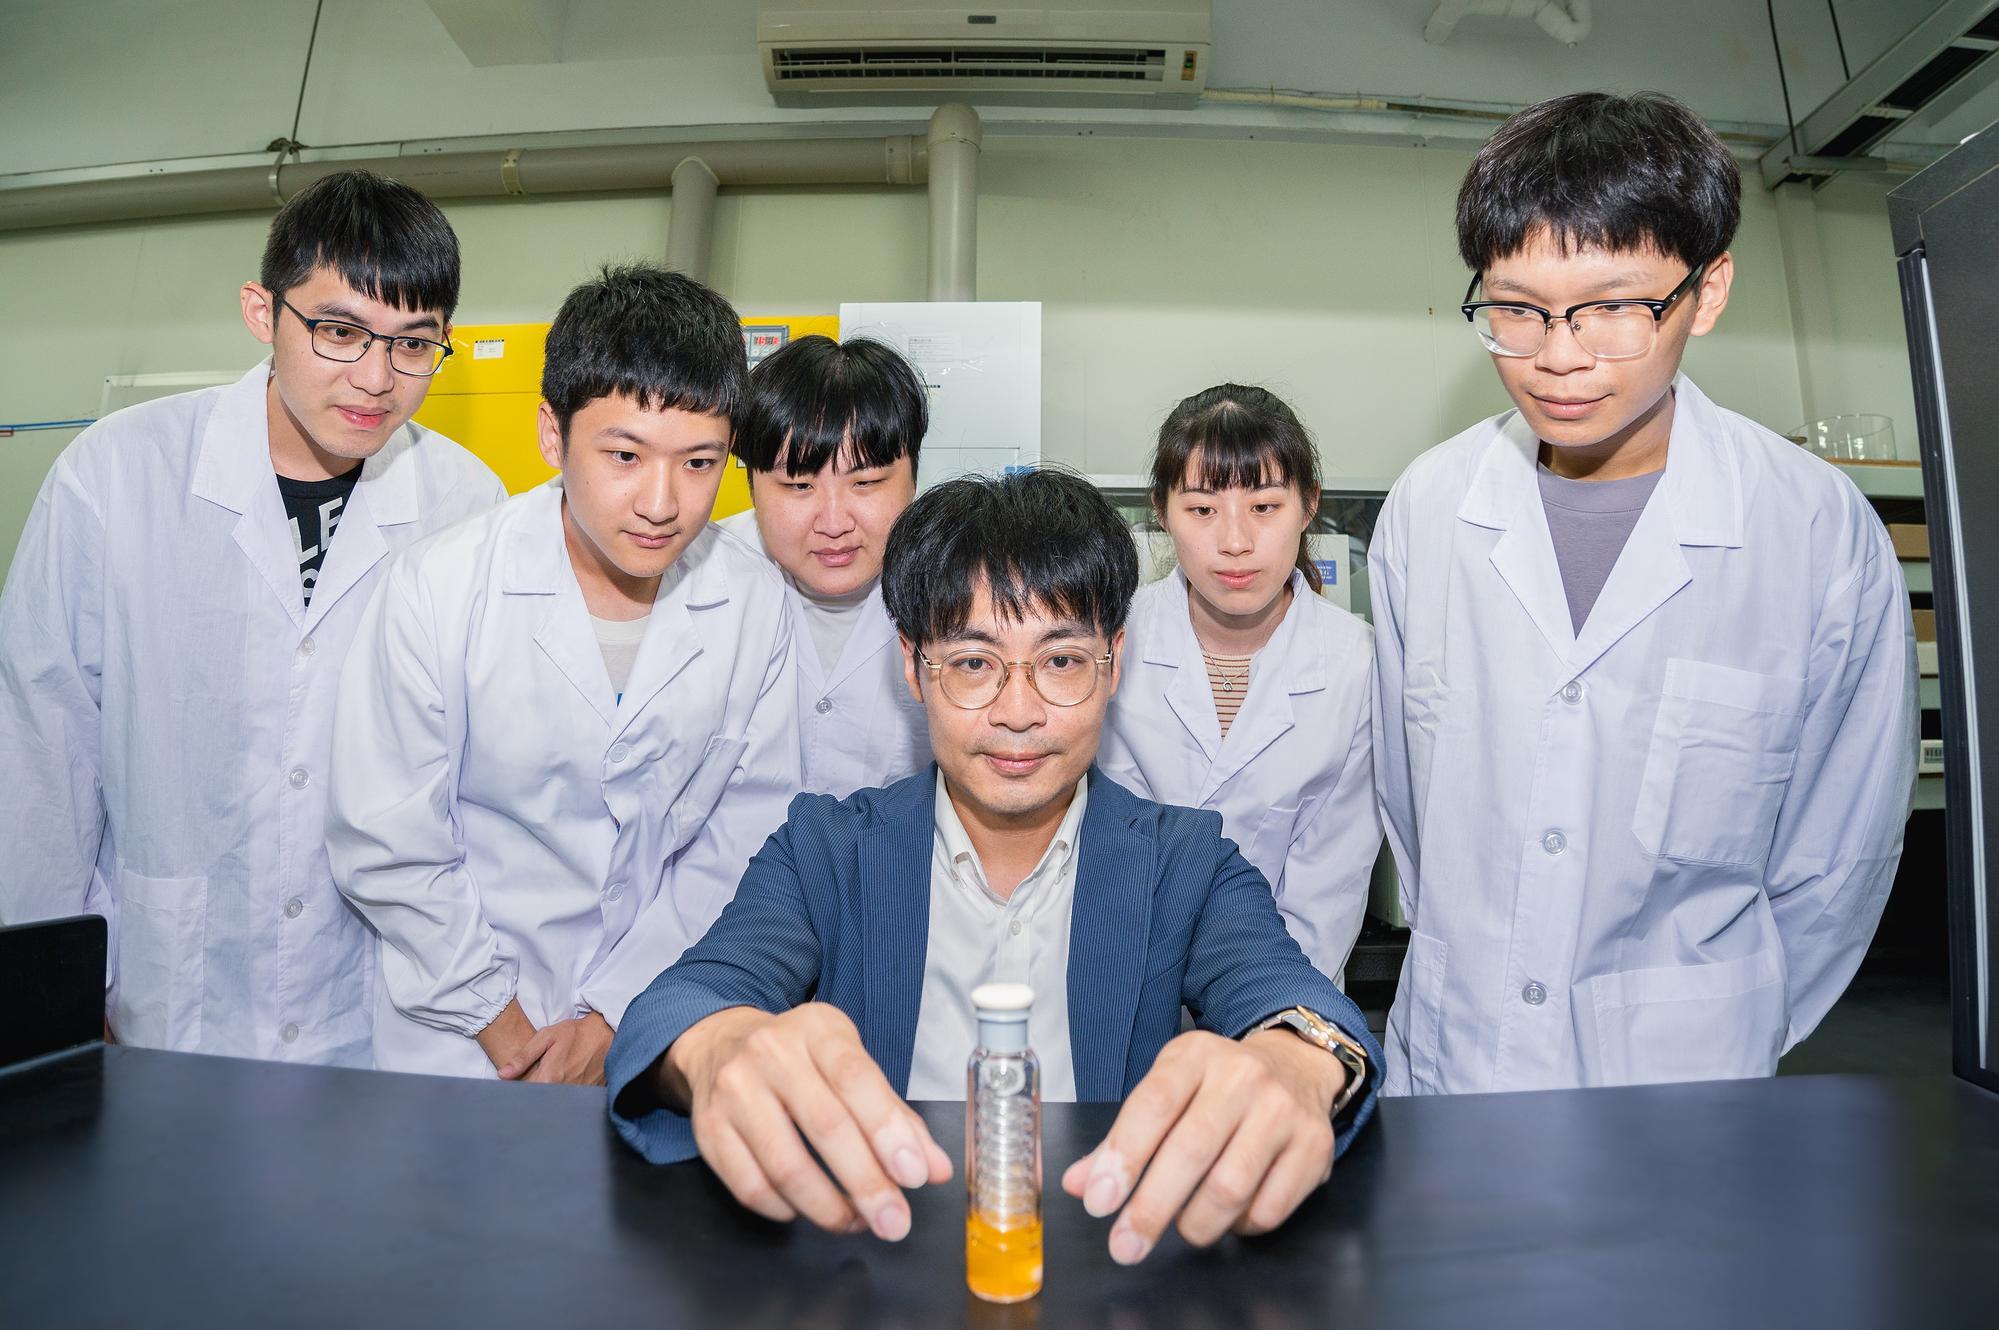 Prof. Ho-Hsiu Chou (周鶴修) from NTHU's Department of Chemical Engineering made a significant breakthrough in seawater hydrogen production technology.